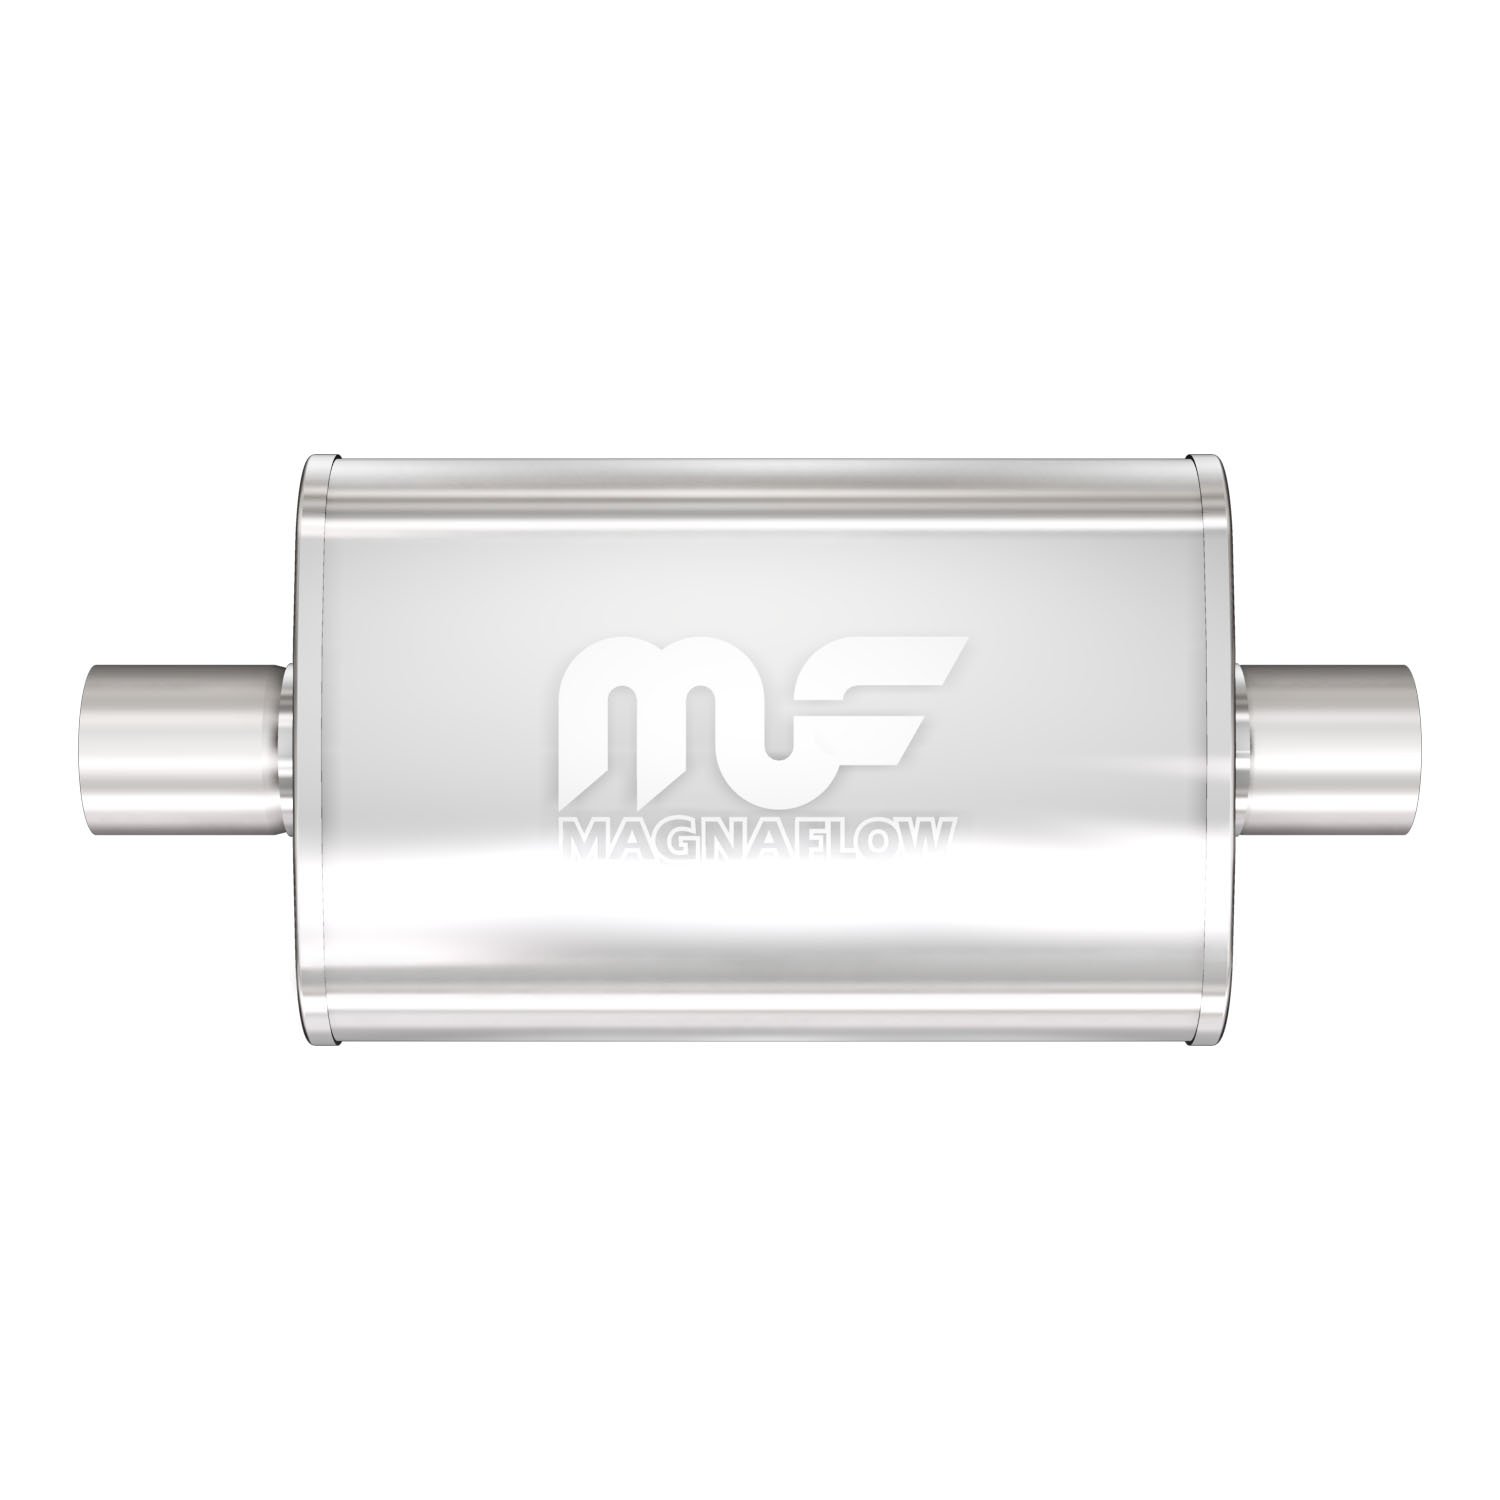 4" x 9" Oval Muffler Center In/Center Out: 2.5"/2.5" Body Length: 14" Overall Length: 20" Core Size: 2.5" Polished Finish